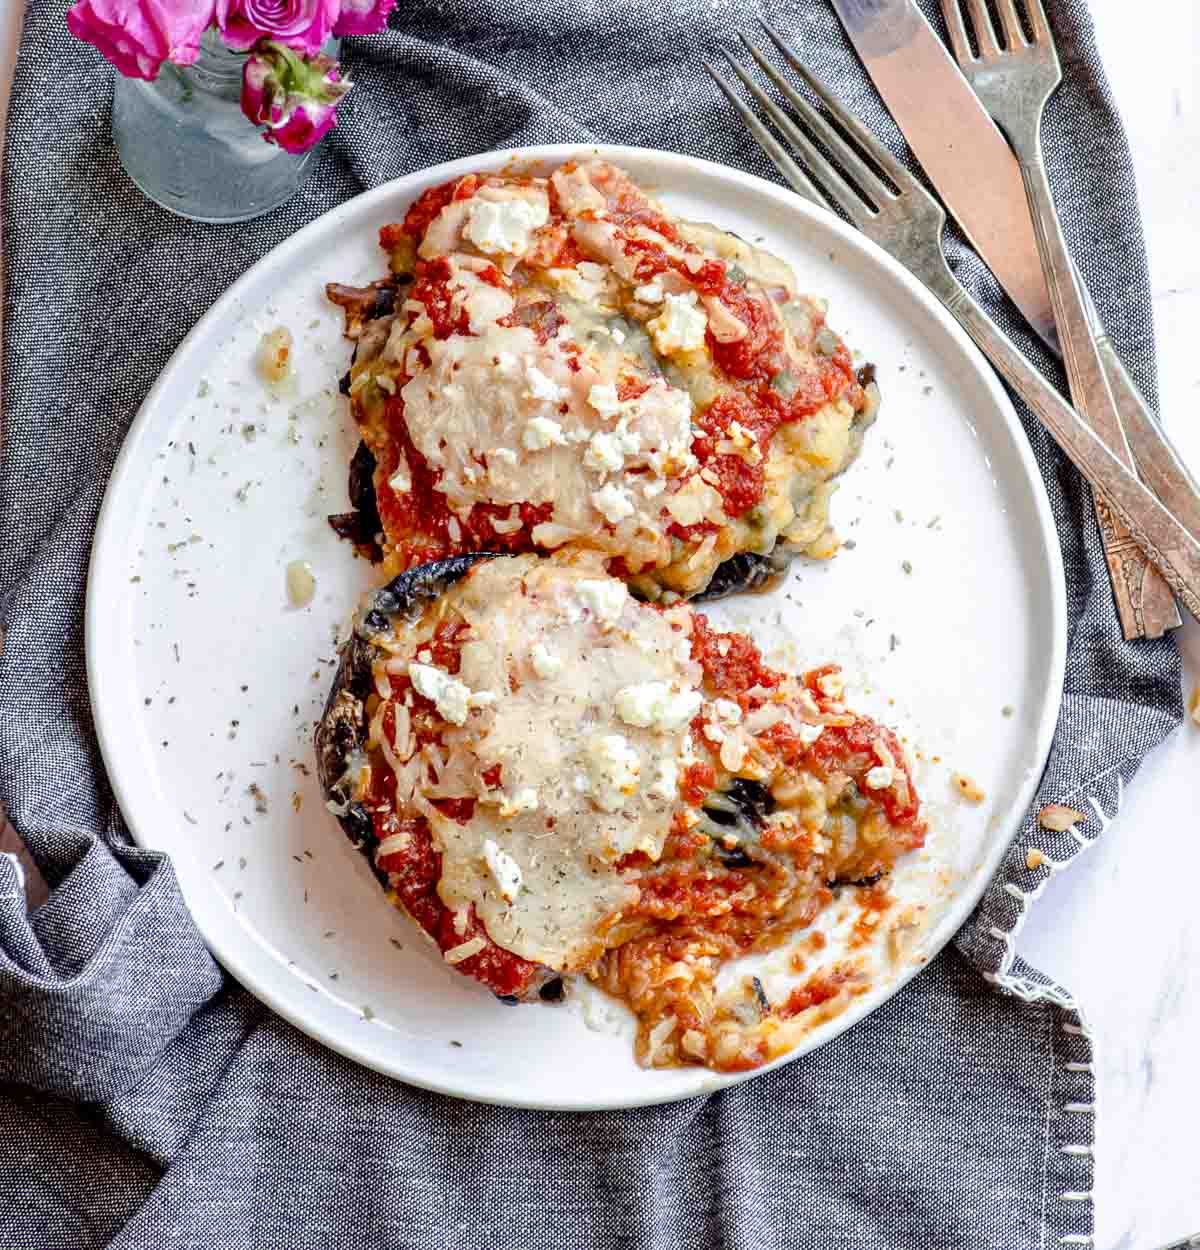 two mashed potato stuffed portobello mushrooms topped with marinara sauce and melted cheese